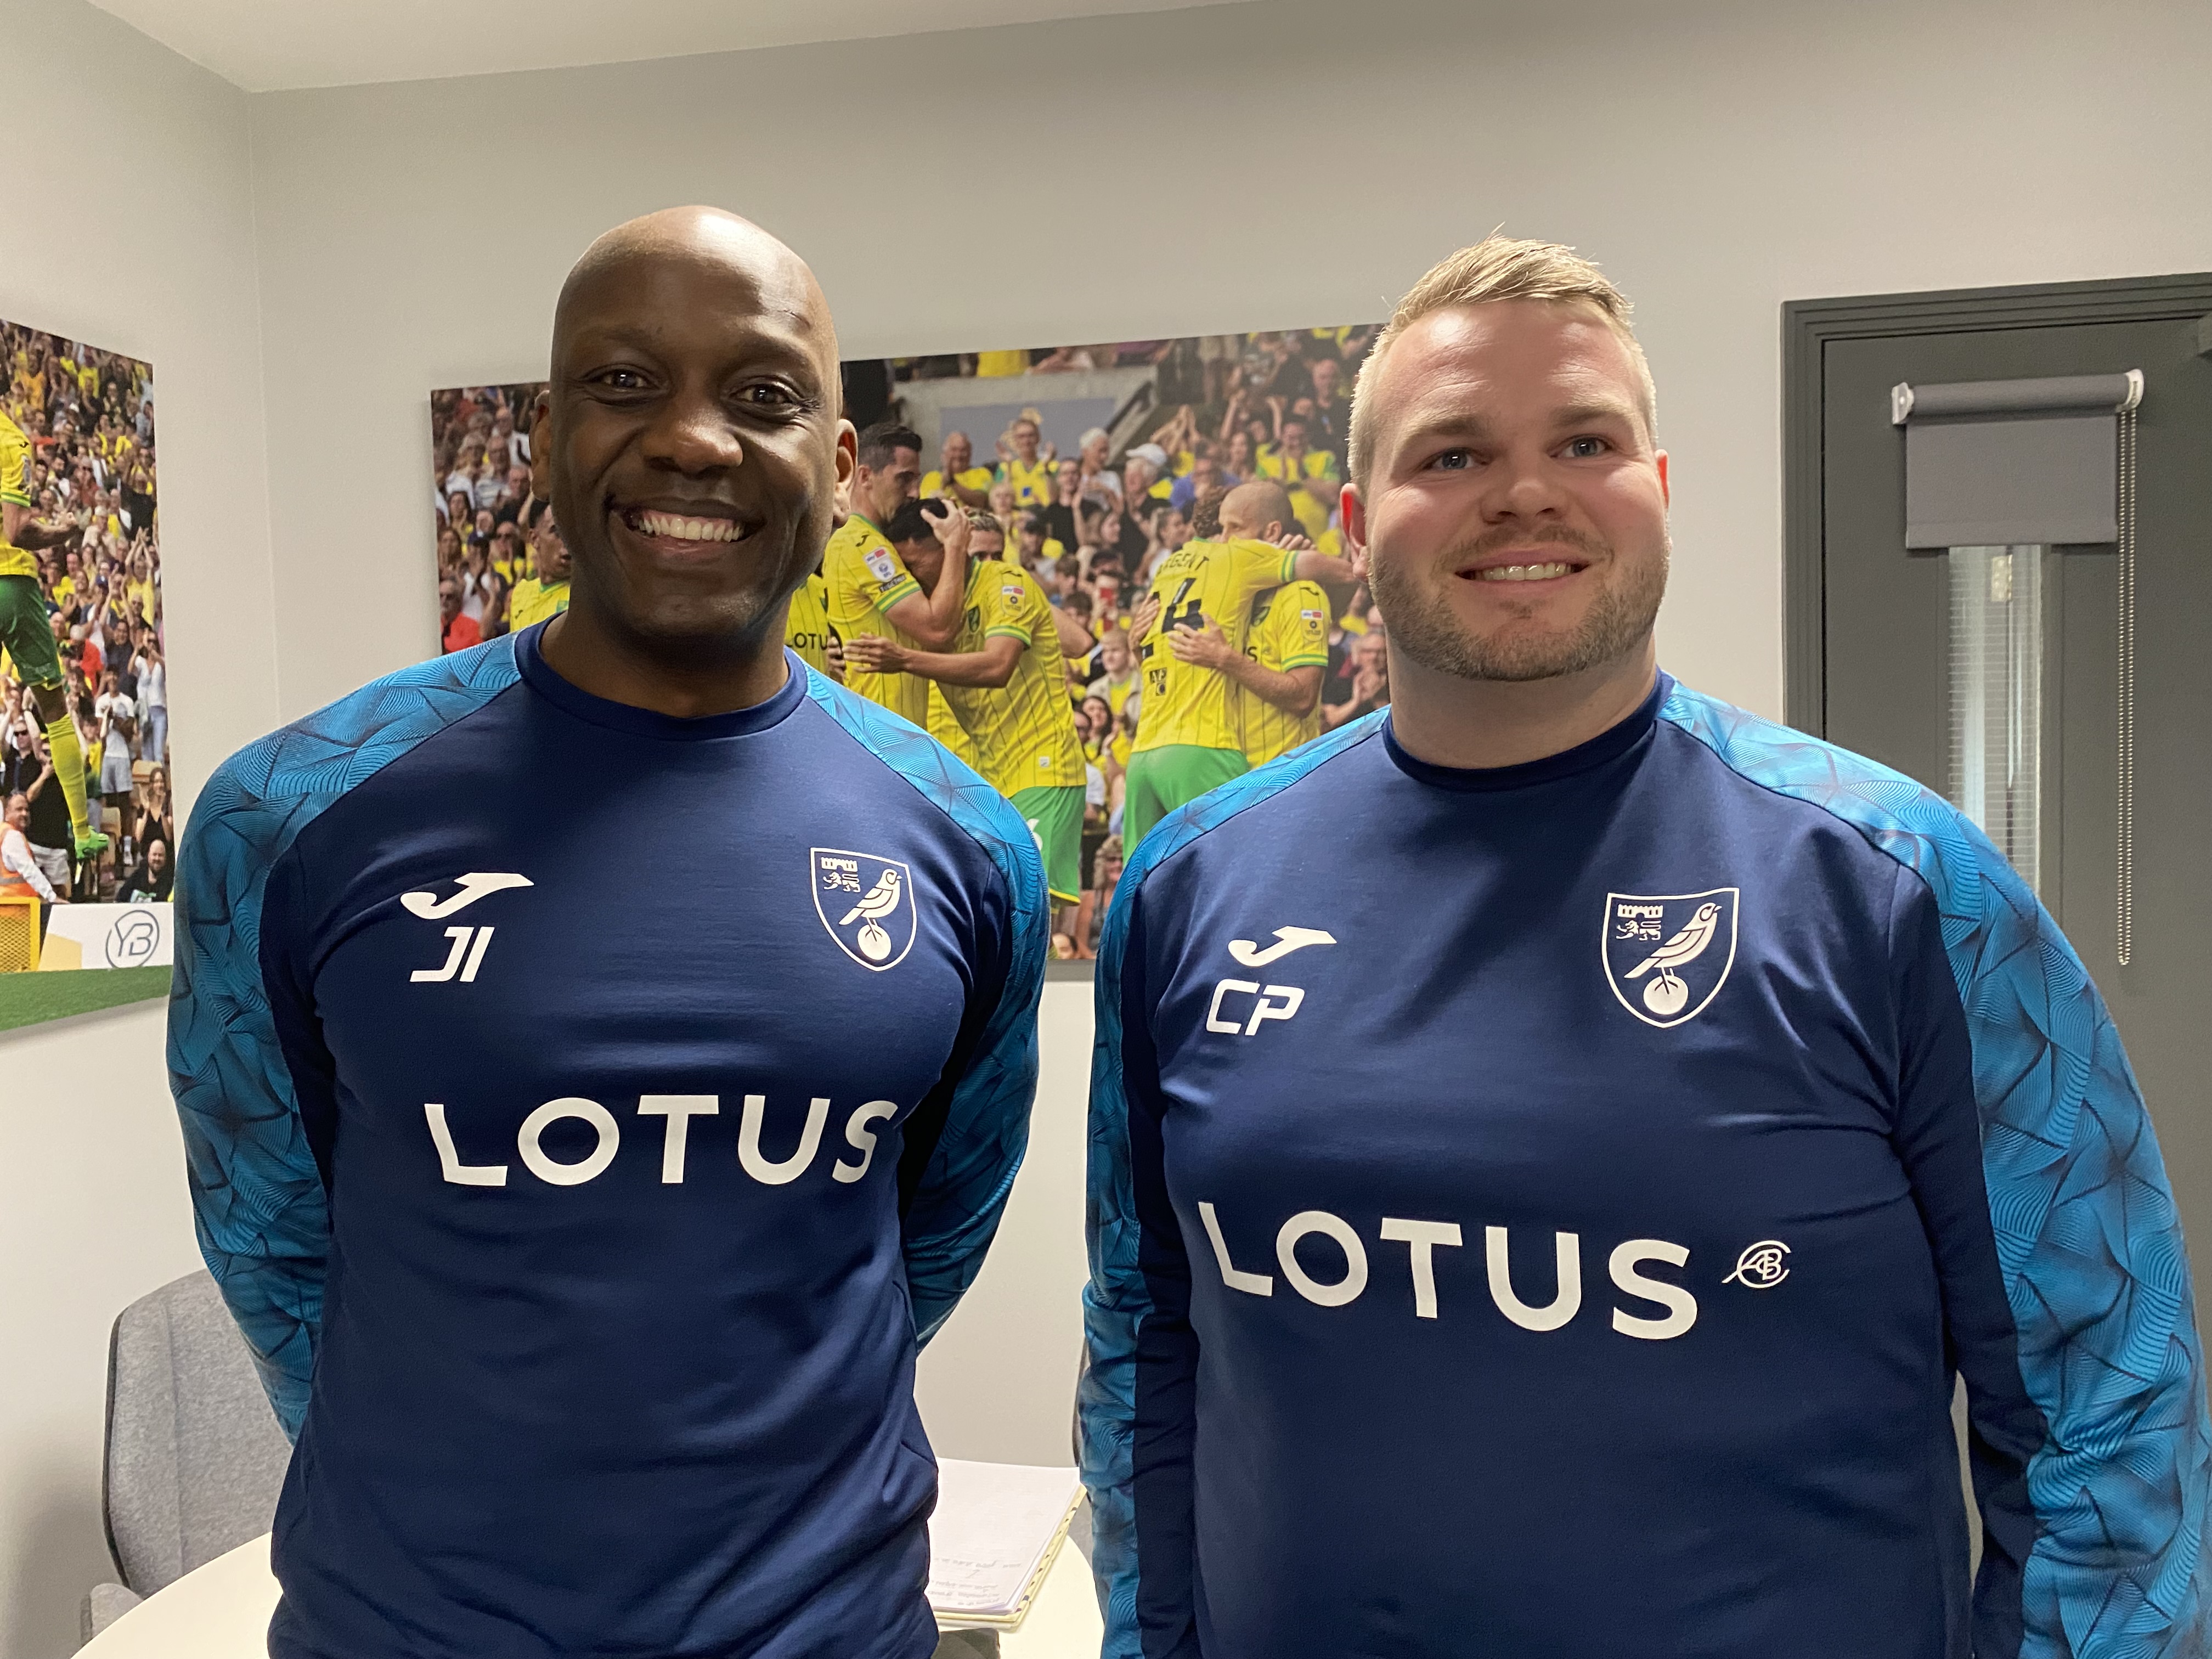 John Iga (left) is Norwich City's Head of Strategy and Innovation. Carl Pope (right) is Lead Performance Insights Analyst.